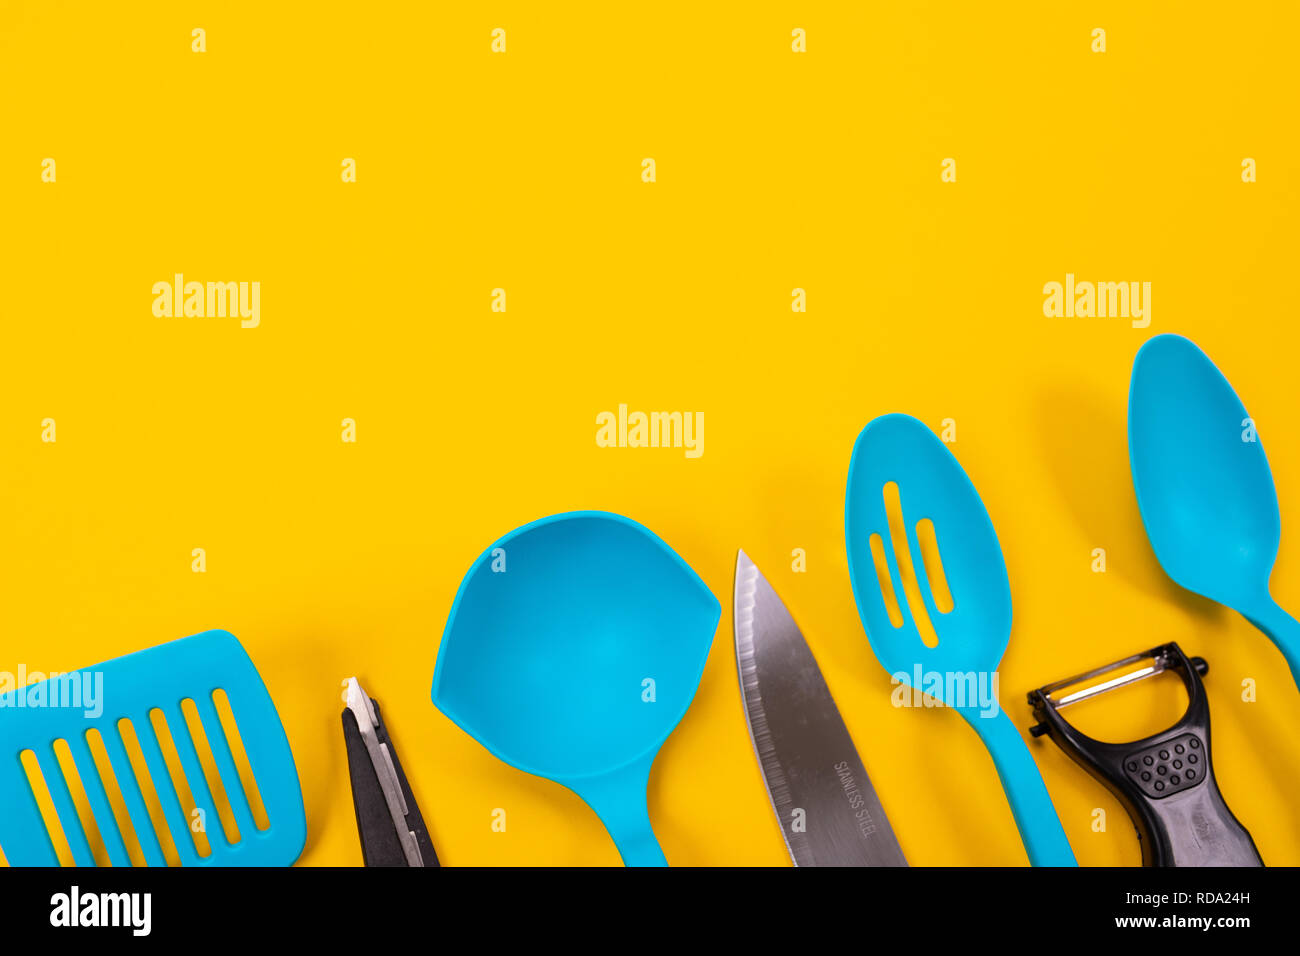 Download Design Concept Of Kitchen Utensils Isolated On Yellow Background Stock Photo Alamy Yellowimages Mockups